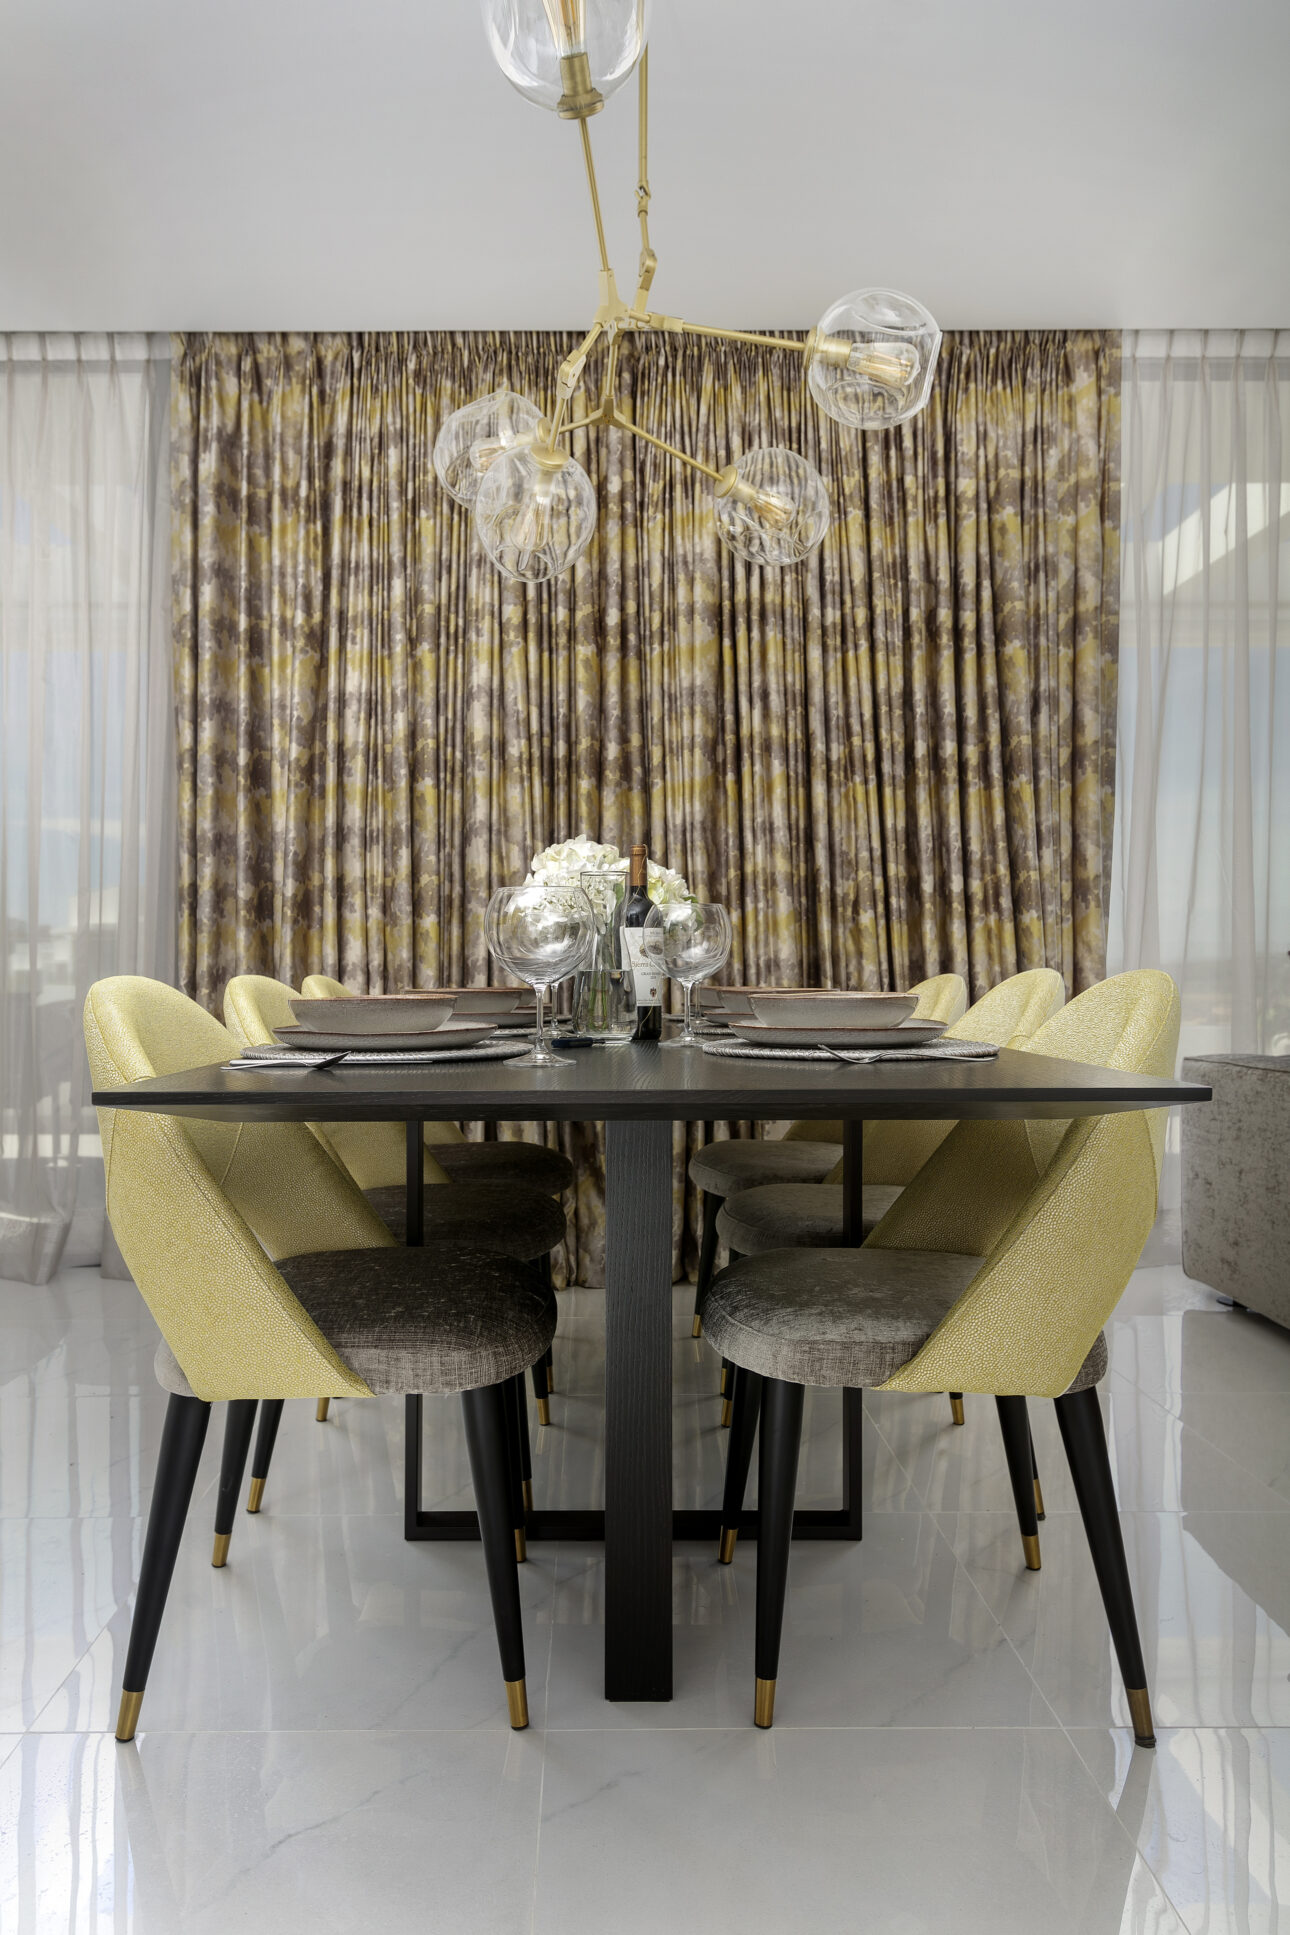 Luxury Penthouse Apartment Dining Area Table